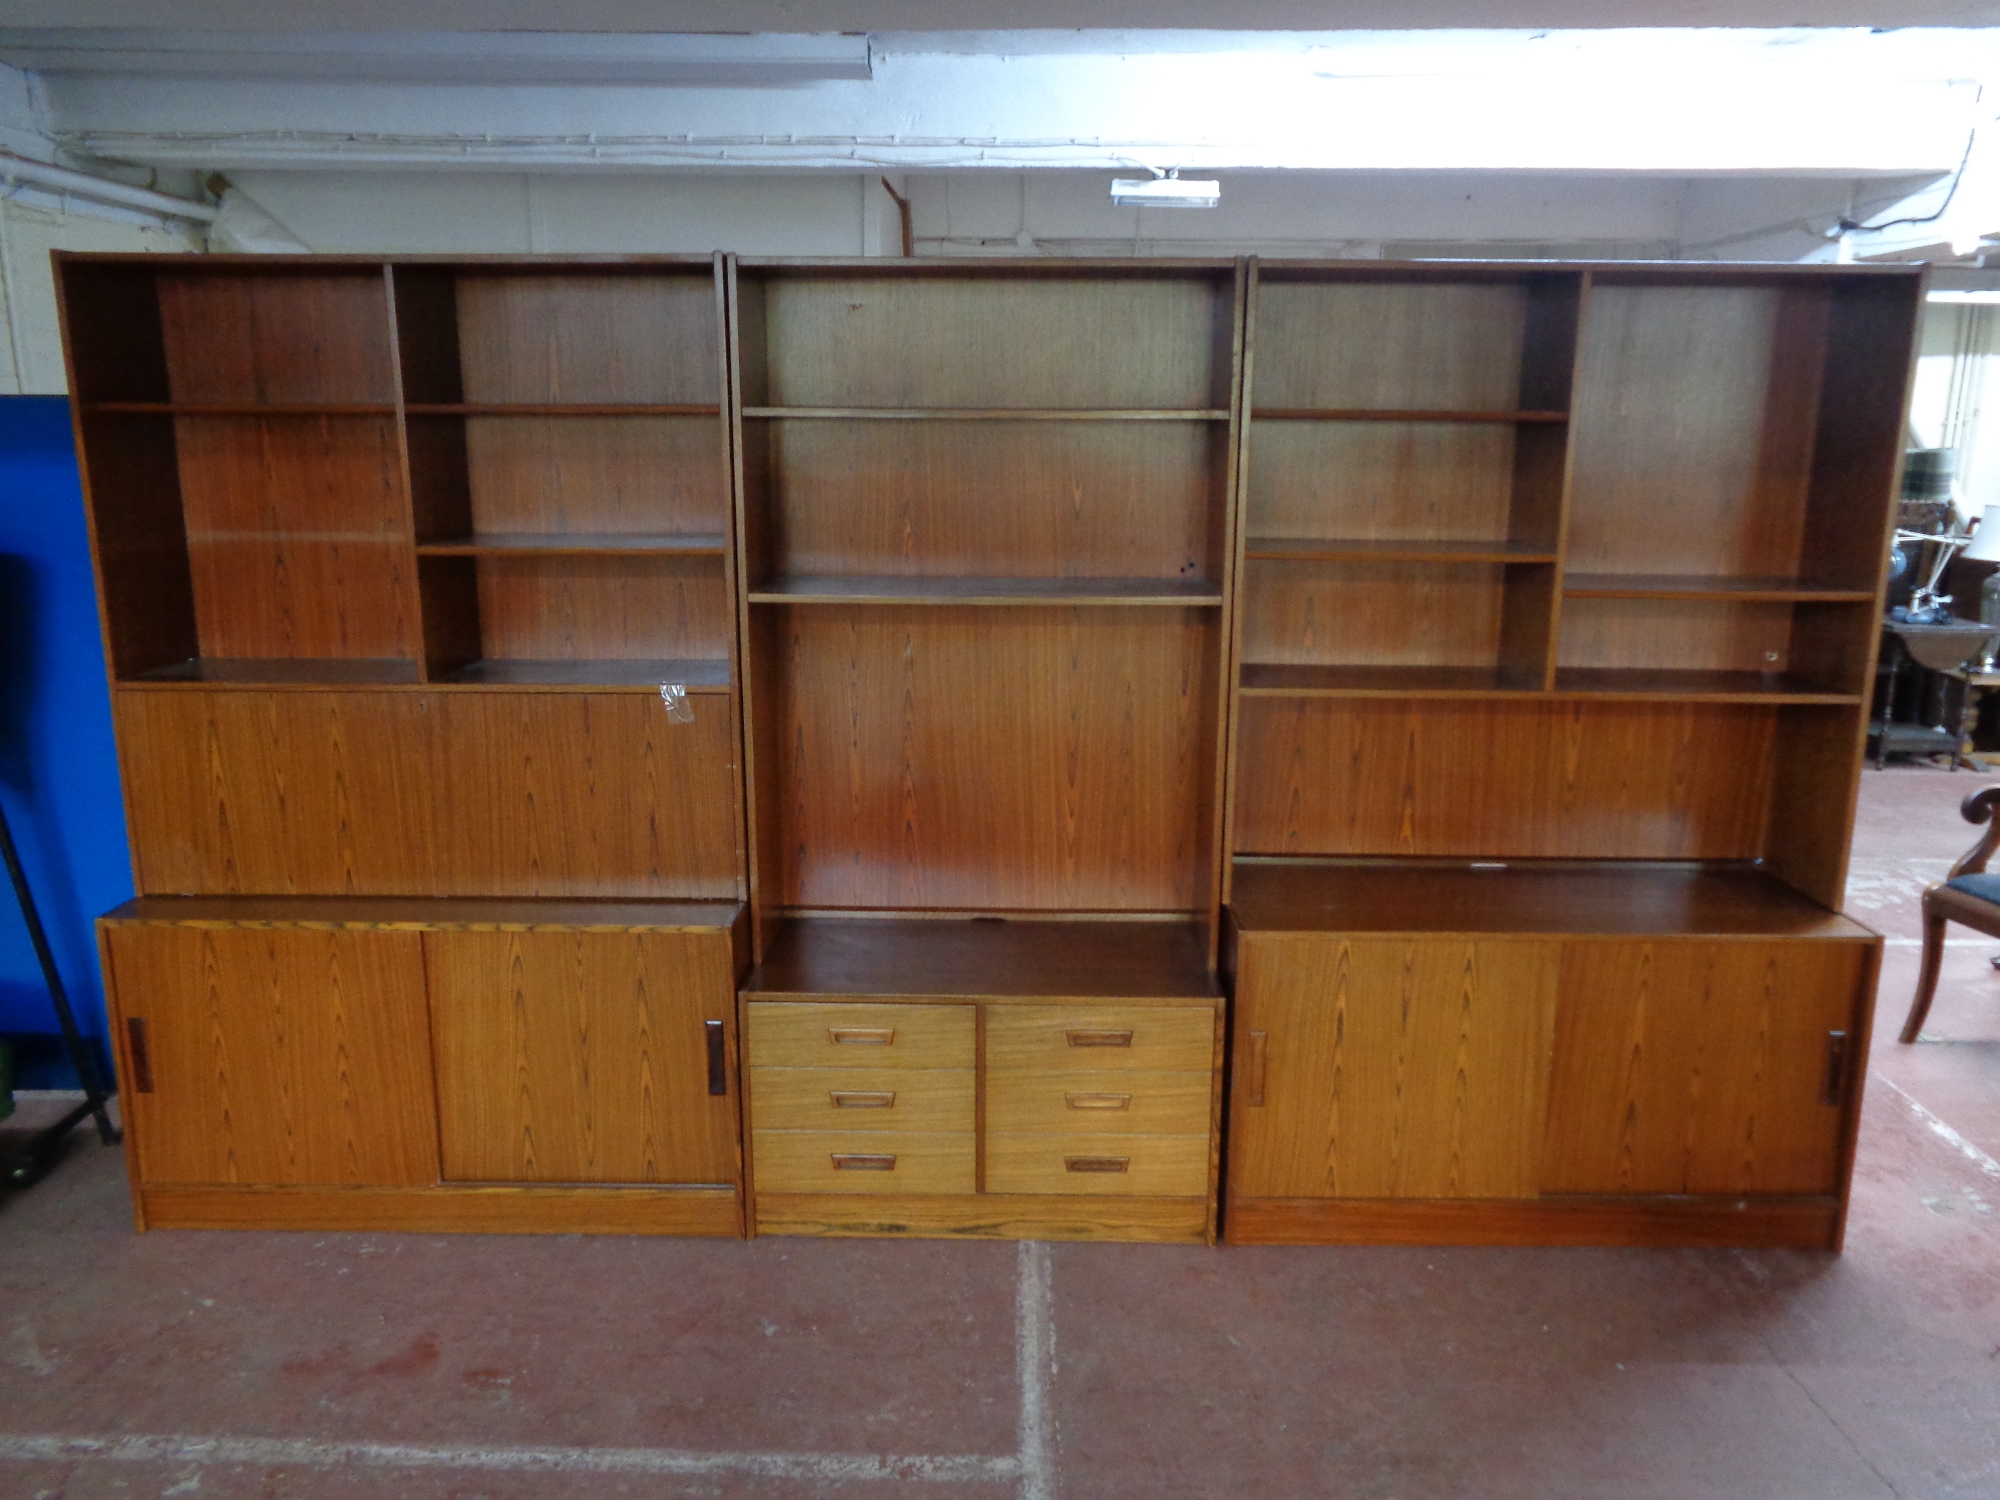 A mid 20th century three piece Danish bookcase fitted cupboards and drawers beneath